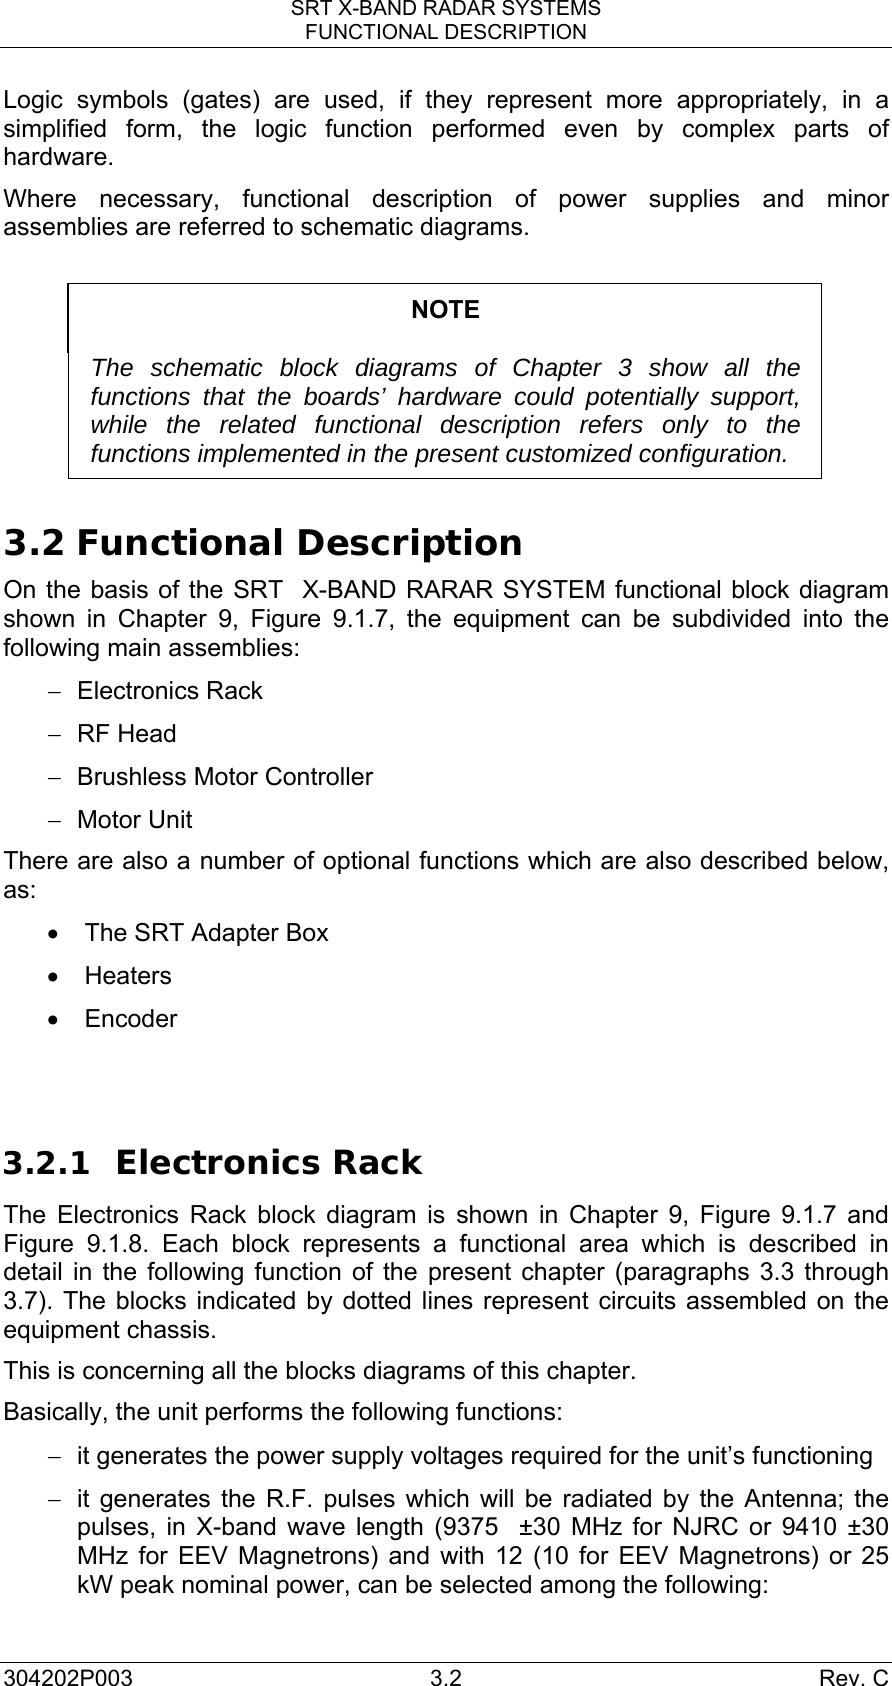 SRT X-BAND RADAR SYSTEMS FUNCTIONAL DESCRIPTION 304202P003 3.2  Rev. C Logic symbols (gates) are used, if they represent more appropriately, in a simplified form, the logic function performed even by complex parts of hardware. Where necessary, functional description of power supplies and minor assemblies are referred to schematic diagrams.  NOTE  The schematic block diagrams of Chapter 3 show all the functions that the boards’ hardware could potentially support, while the related functional description refers only to the functions implemented in the present customized configuration.  3.2 Functional Description On the basis of the SRT  X-BAND RARAR SYSTEM functional block diagram shown in Chapter 9, Figure 9.1.7, the equipment can be subdivided into the following main assemblies: − Electronics Rack − RF Head −  Brushless Motor Controller −  Motor Unit  There are also a number of optional functions which are also described below, as: •  The SRT Adapter Box • Heaters  • Encoder   3.2.1 Electronics Rack The Electronics Rack block diagram is shown in Chapter 9, Figure 9.1.7 and Figure 9.1.8. Each block represents a functional area which is described in detail in the following function of the present chapter (paragraphs 3.3 through 3.7). The blocks indicated by dotted lines represent circuits assembled on the equipment chassis. This is concerning all the blocks diagrams of this chapter. Basically, the unit performs the following functions: −  it generates the power supply voltages required for the unit’s functioning −  it generates the R.F. pulses which will be radiated by the Antenna; the pulses, in X-band wave length (9375  ±30 MHz for NJRC or 9410 ±30 MHz for EEV Magnetrons) and with 12 (10 for EEV Magnetrons) or 25 kW peak nominal power, can be selected among the following: 